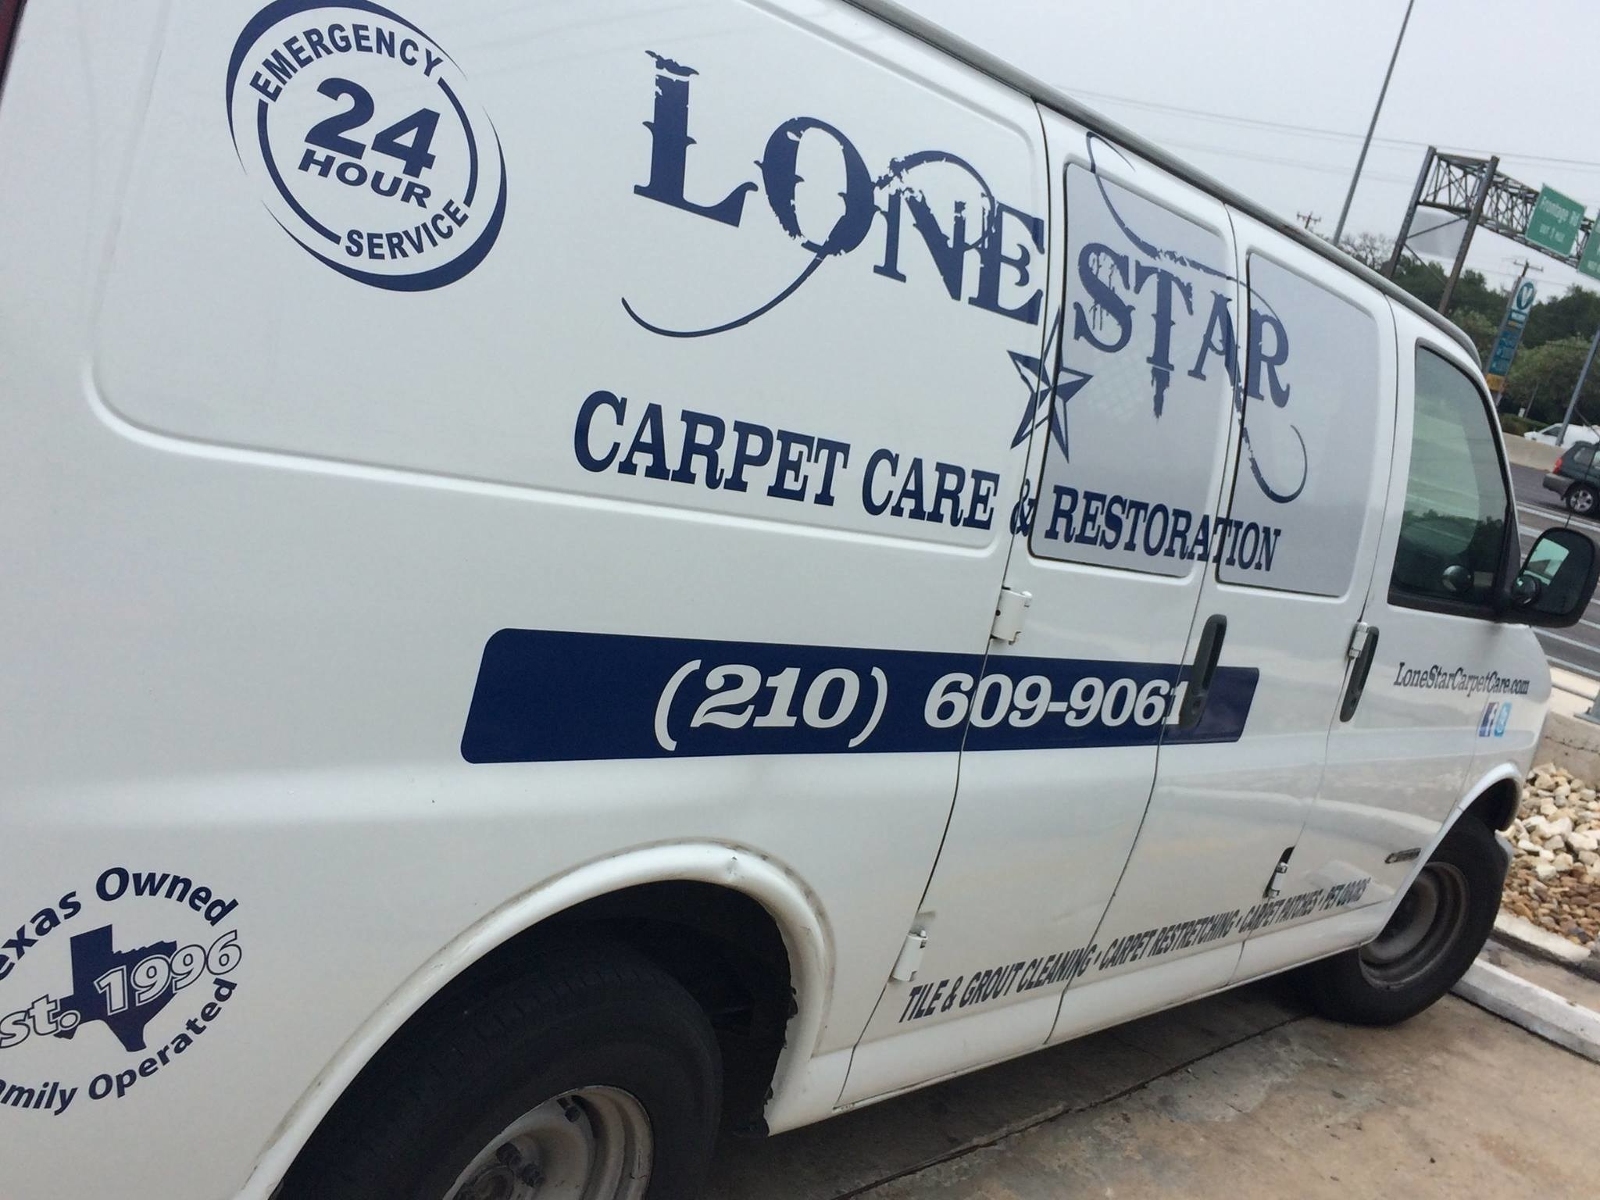 Lone Star Carpet Care And Restoration Offers Carpet Repairs For Home And …